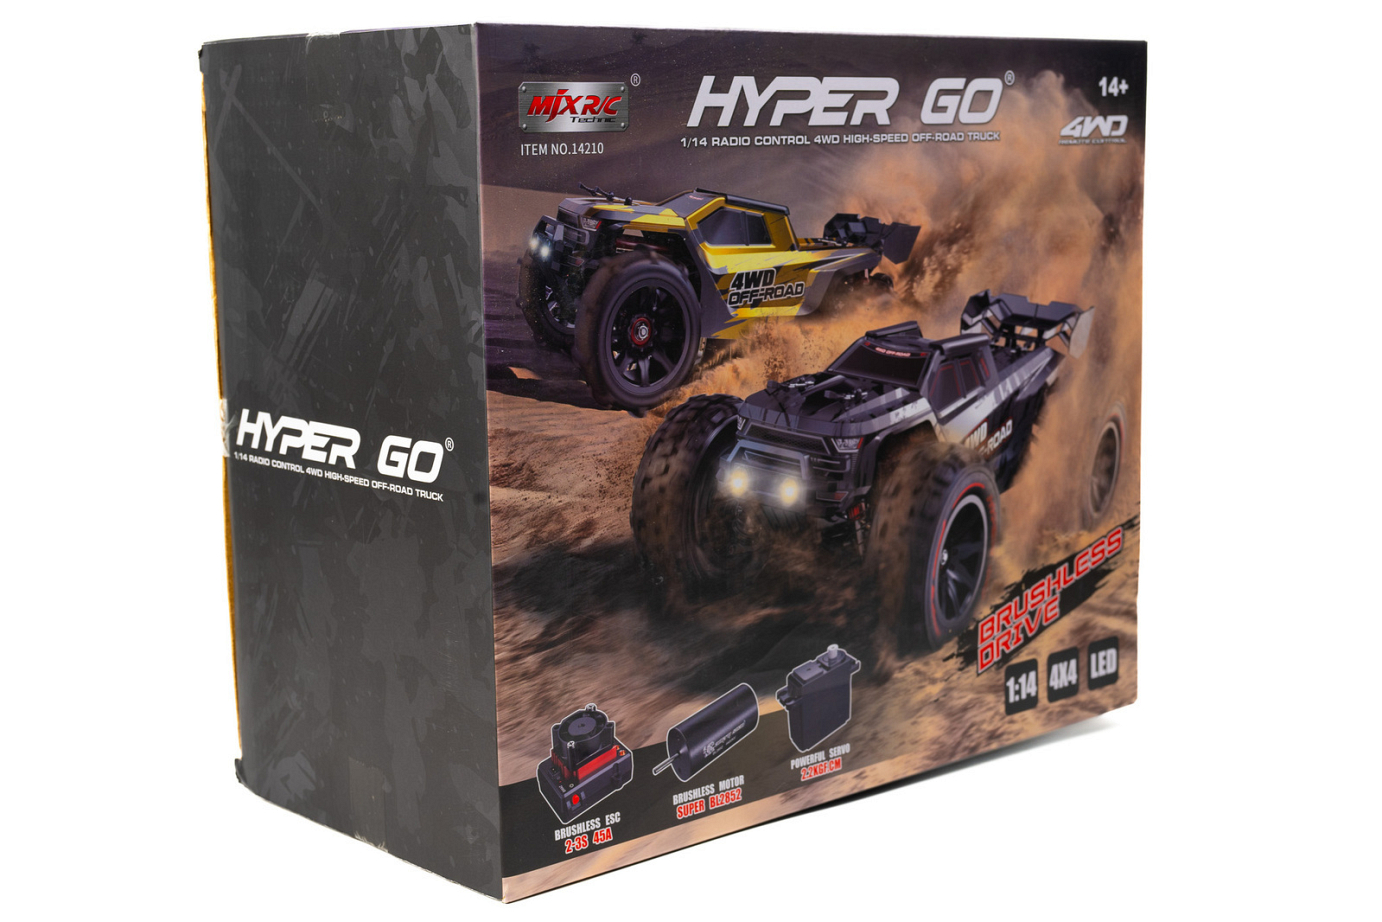 MJX 1/14 Hyper Go 4WD High-speed Off-road Brushless RC Truggy [14210]